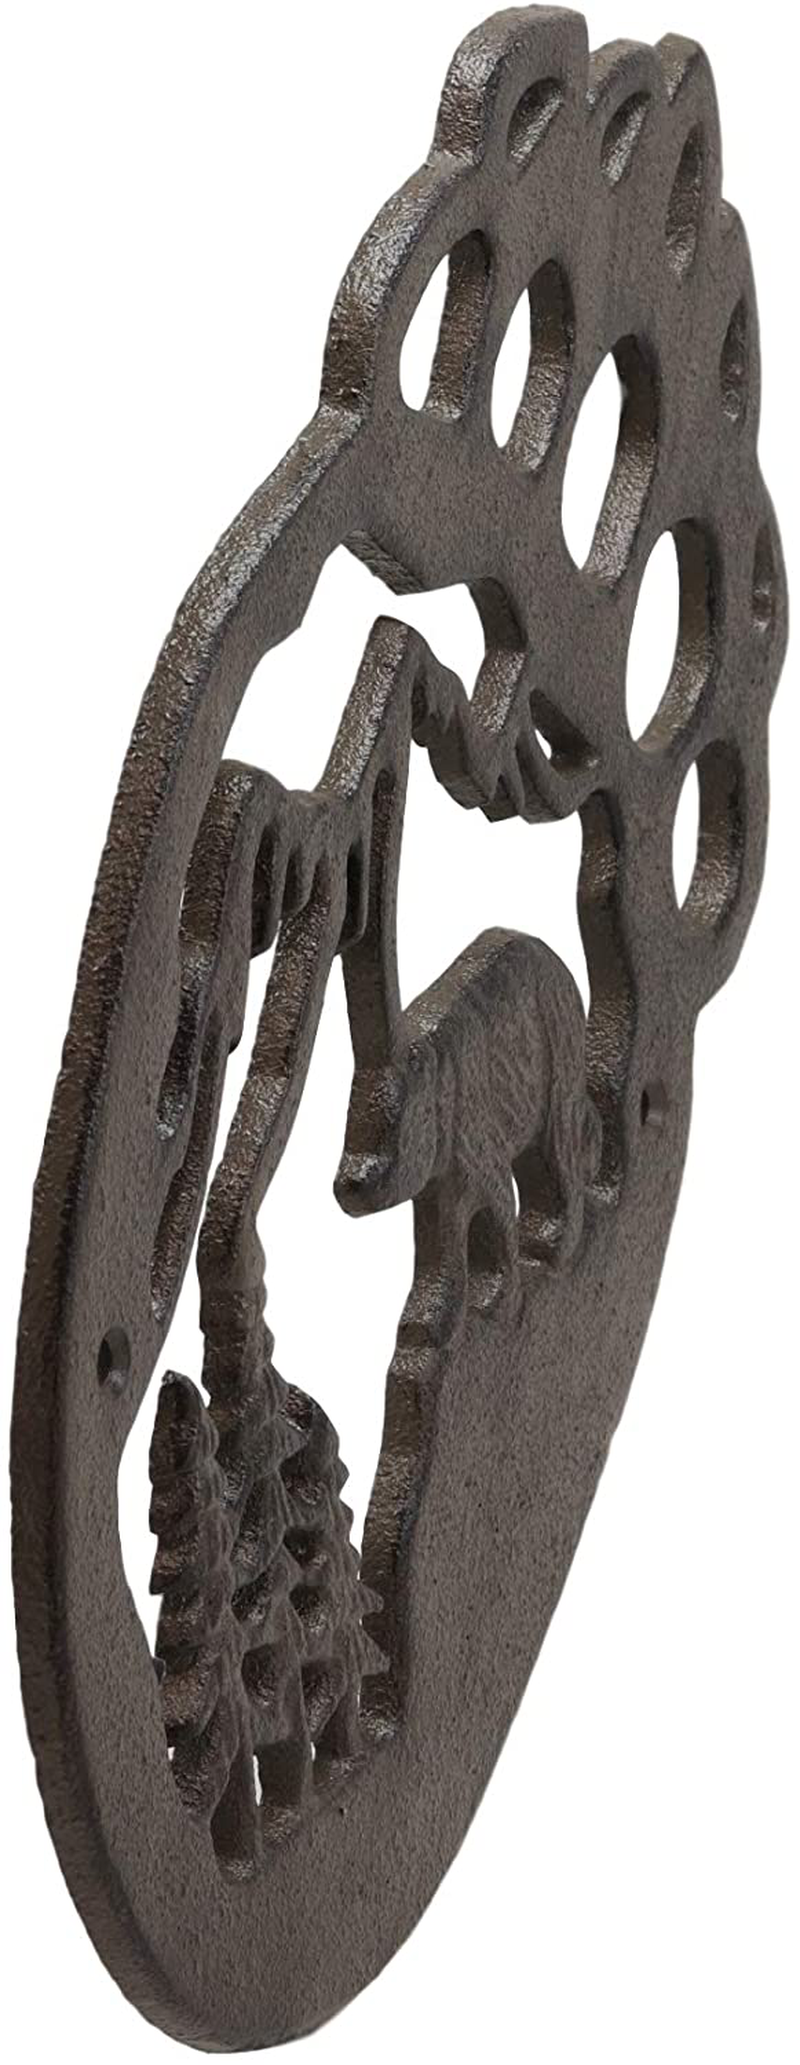 Ebros Gift 11.5" Wide Western Black Bear Paw With Pine Tree Forest And Mountain Design Cast Iron Metal Wall Decor Plaque Southwest Rustic Country Bears Vintage Decorative Accent For Walls Or Tables Home & Garden > Decor > Artwork > Sculptures & Statues Ebros Gift   